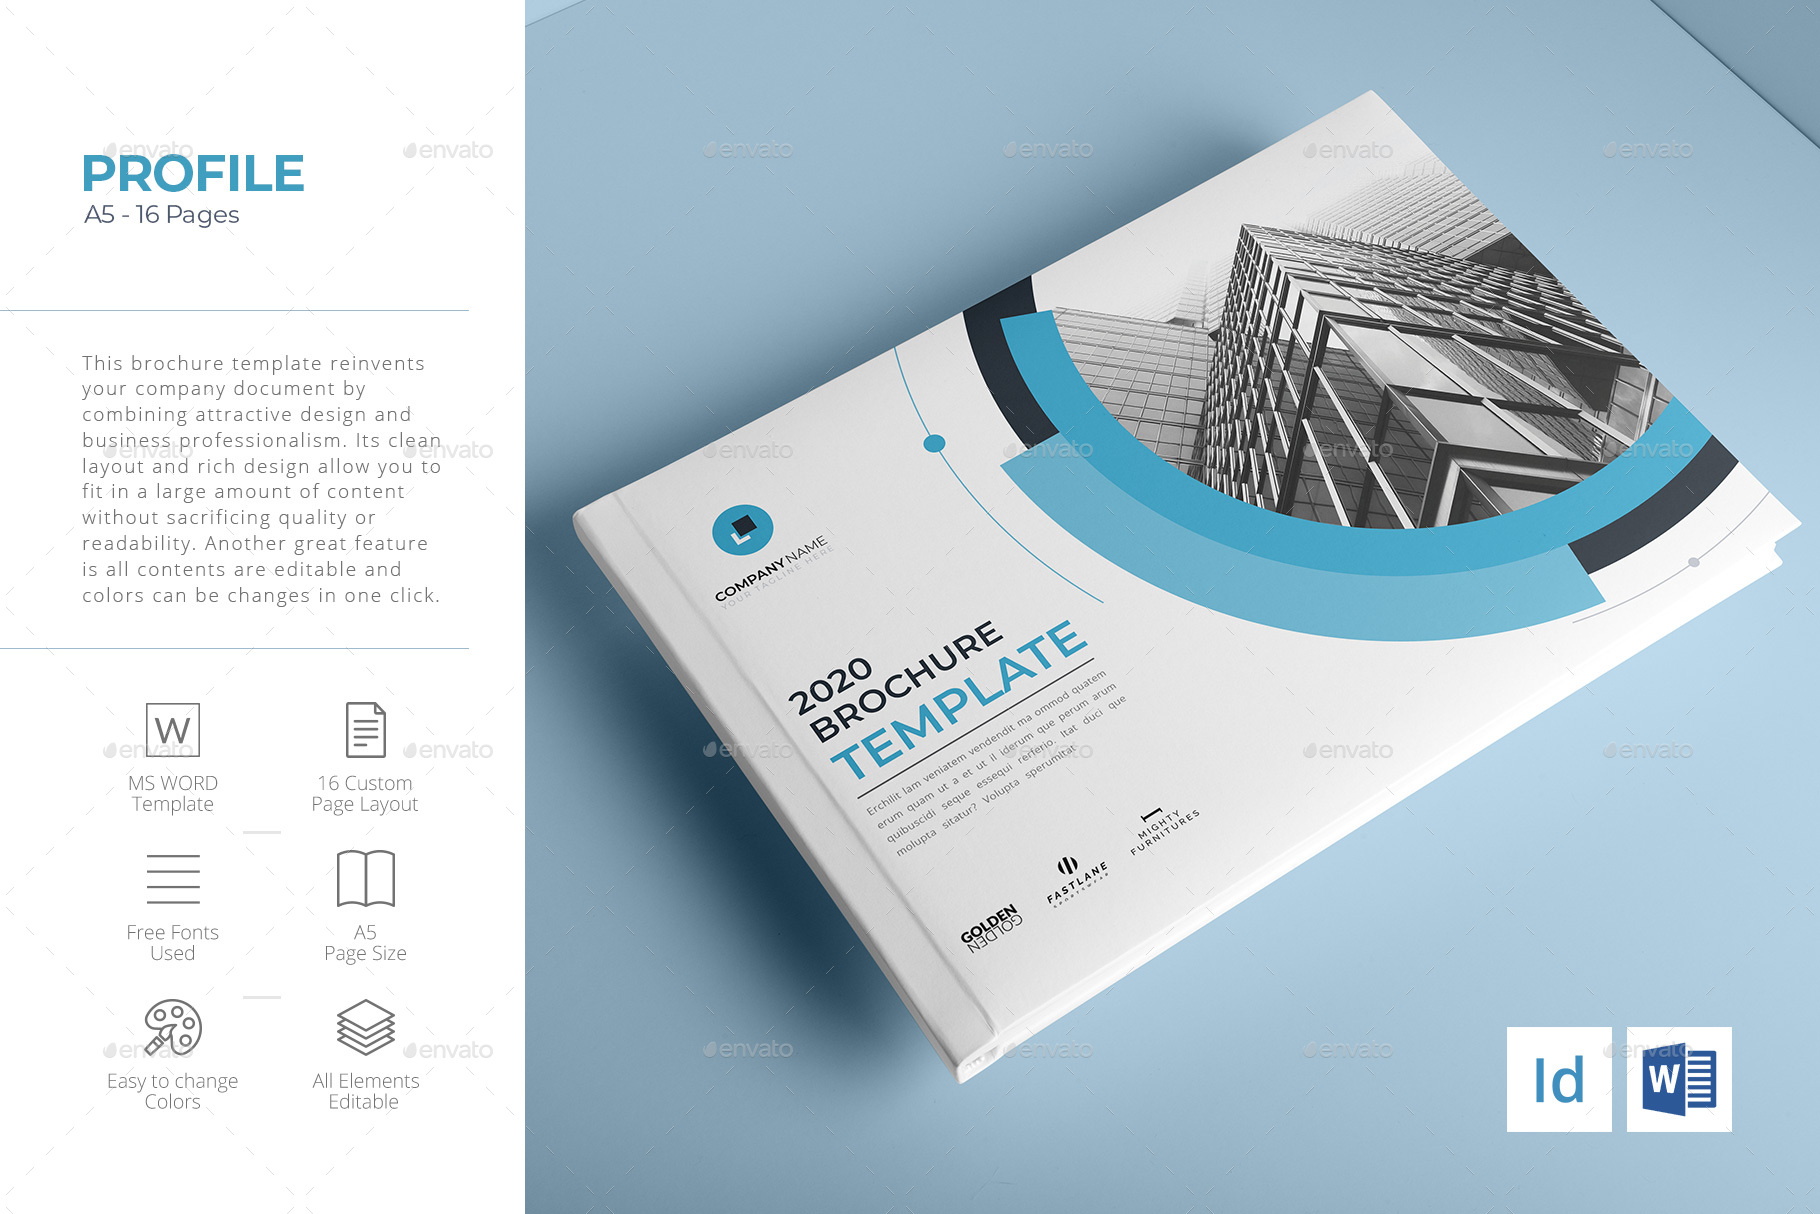 A5 Company Profile, Word Template by Brochures99 GraphicRiver